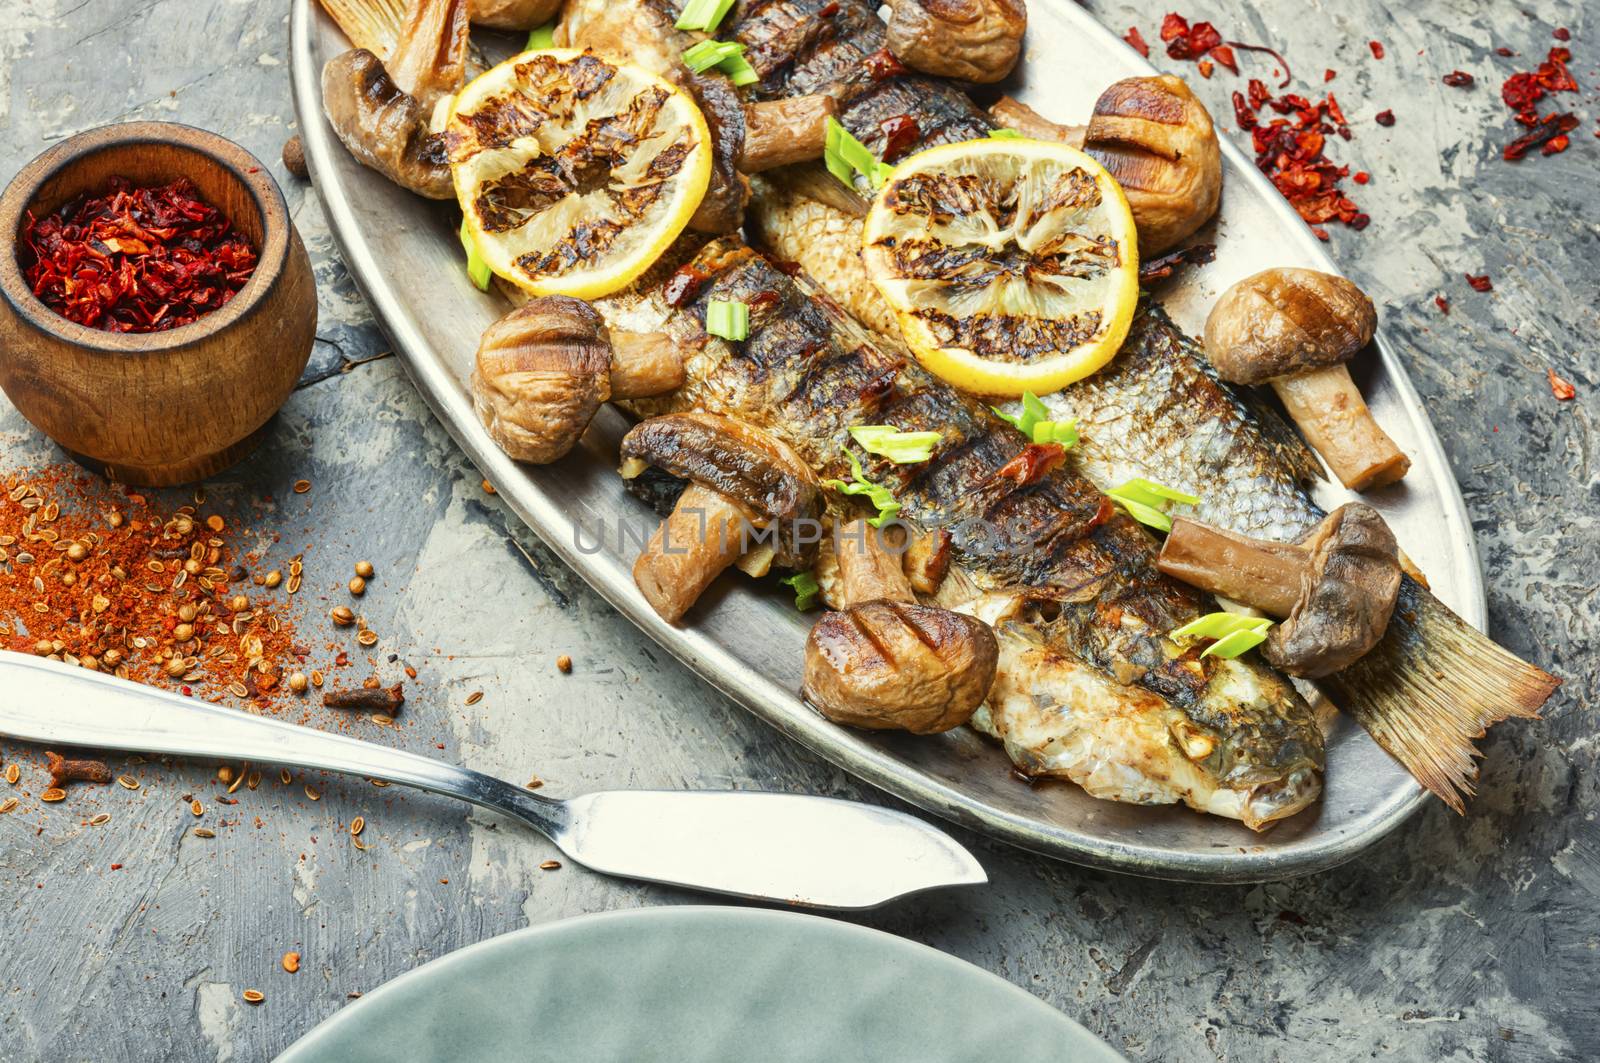 Grilled fish on tray by LMykola